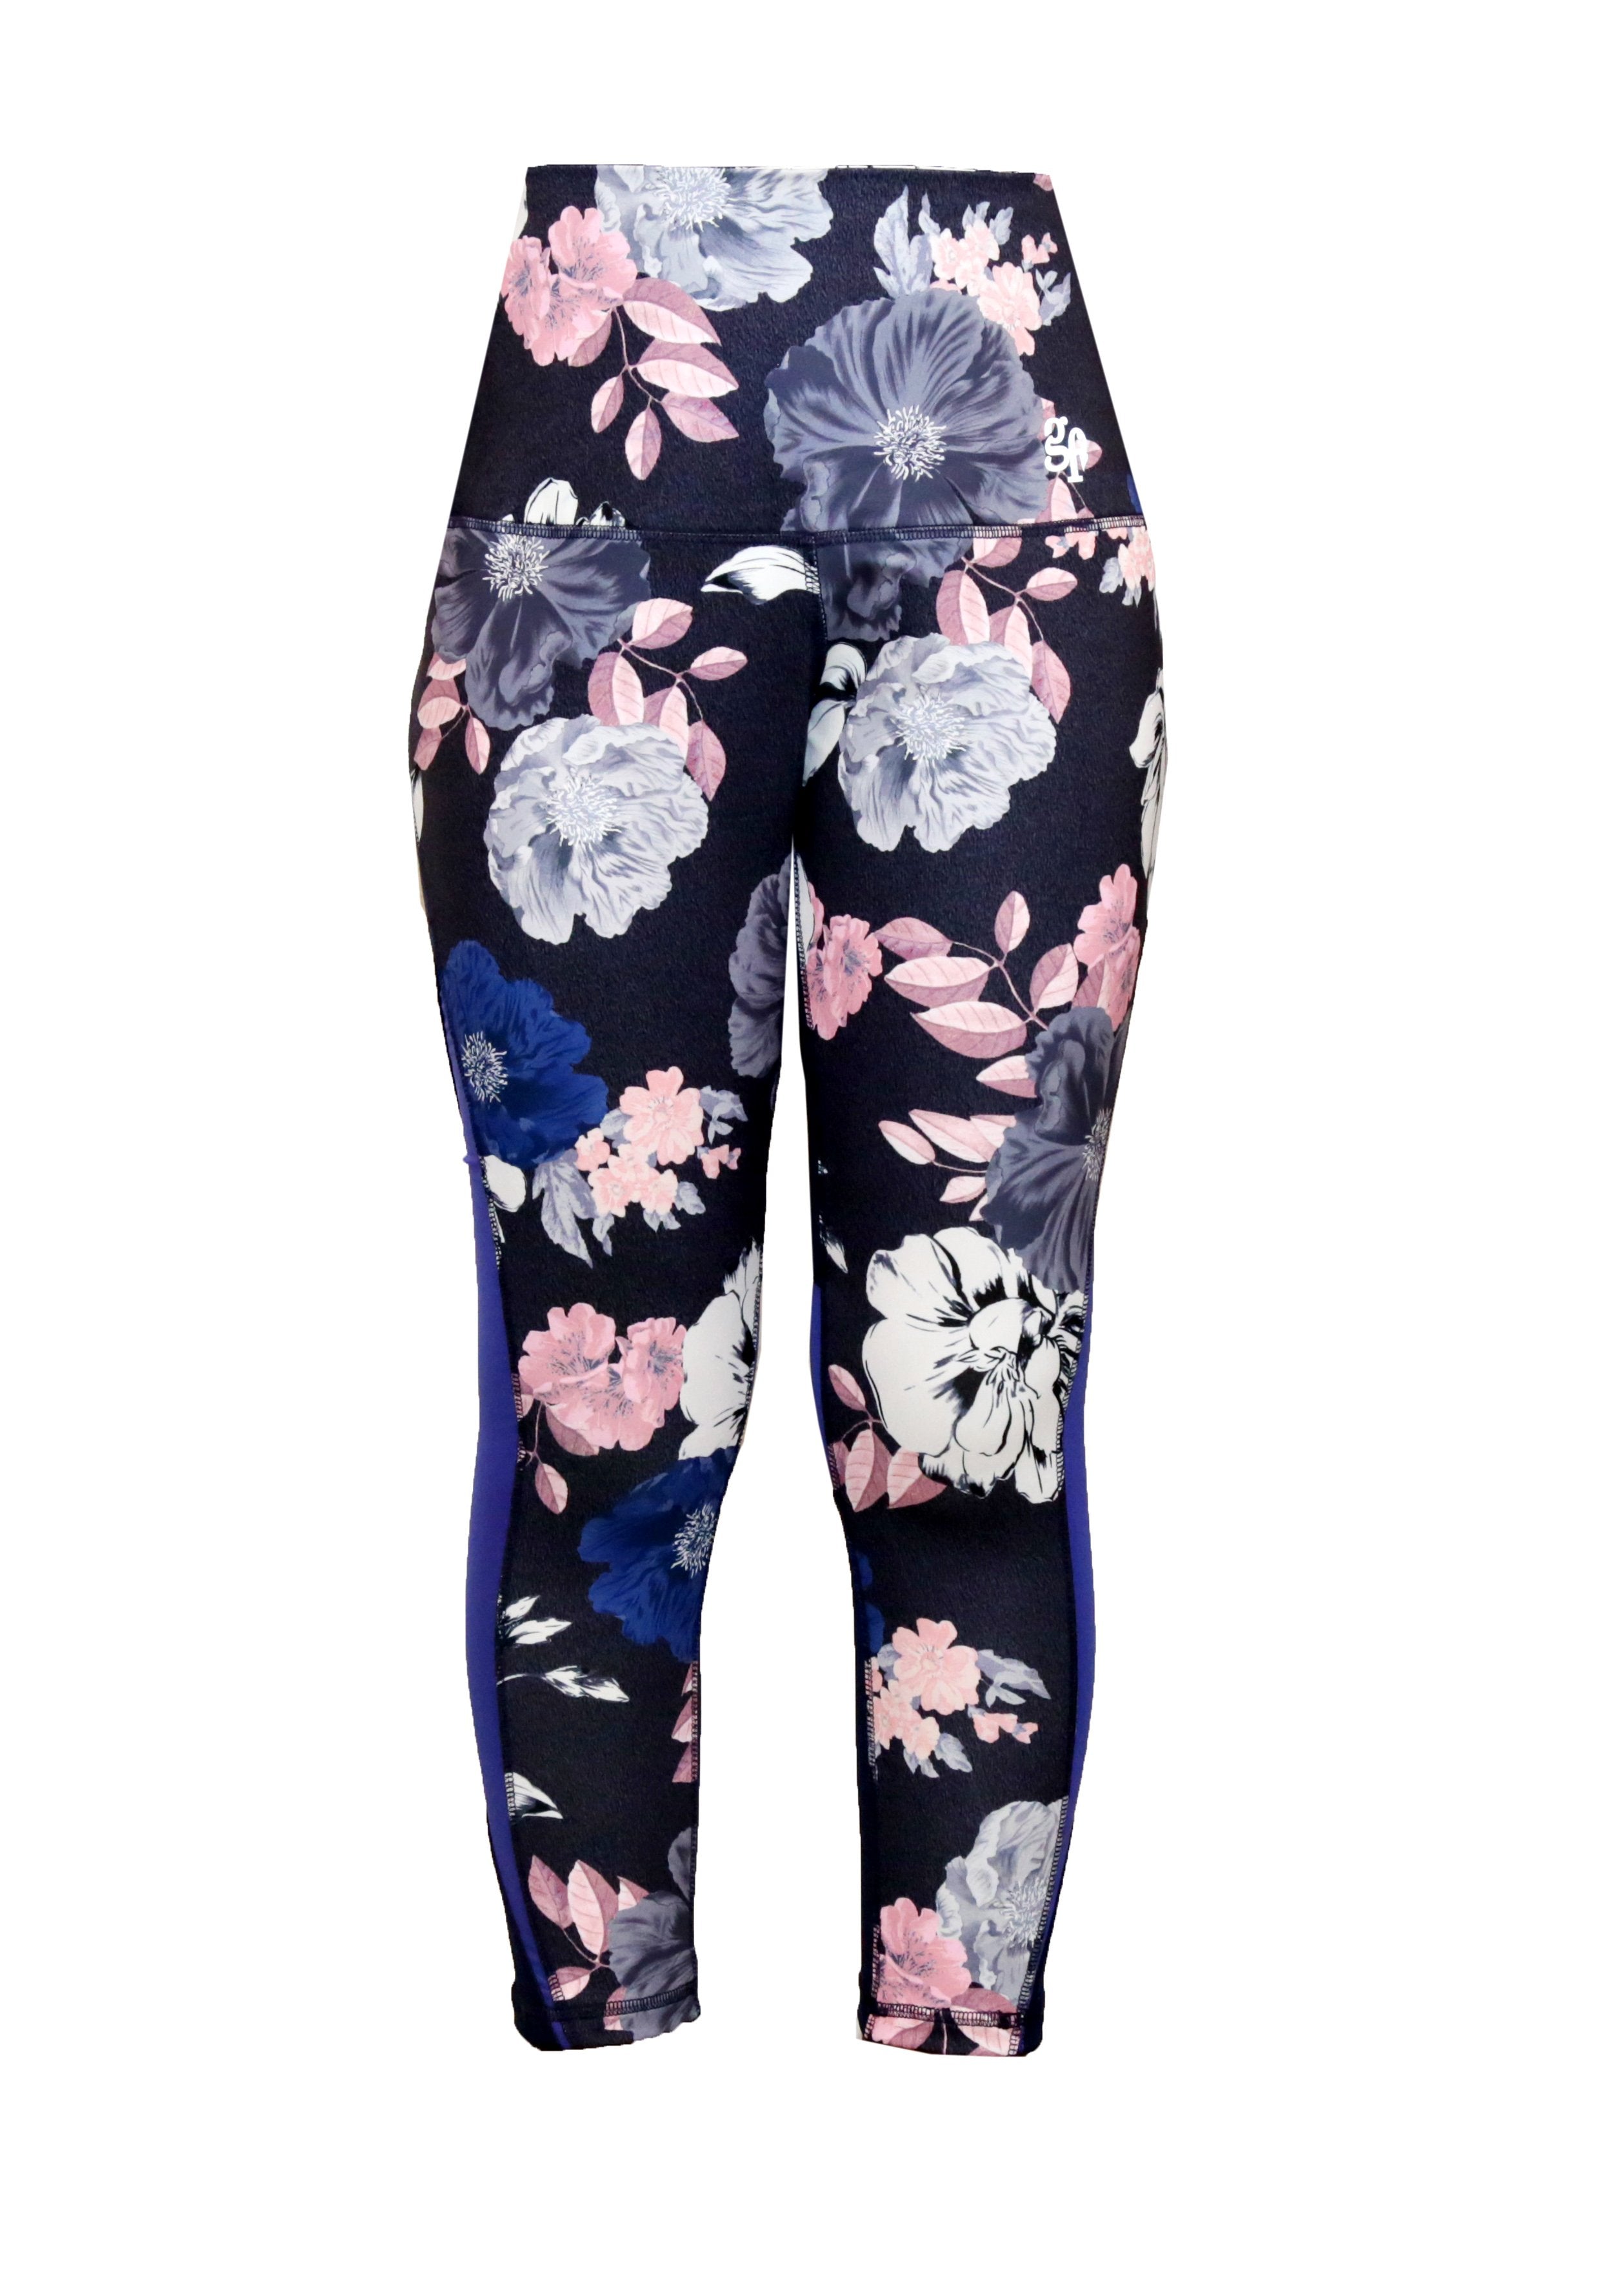 Buy Sunflower Fitness Leggings for Women, Floral Workout Pants, Yoga Legging  With Flowers, Colorful Jogging Pants Fashion Legging Ladies Clothes Online  in India - Etsy